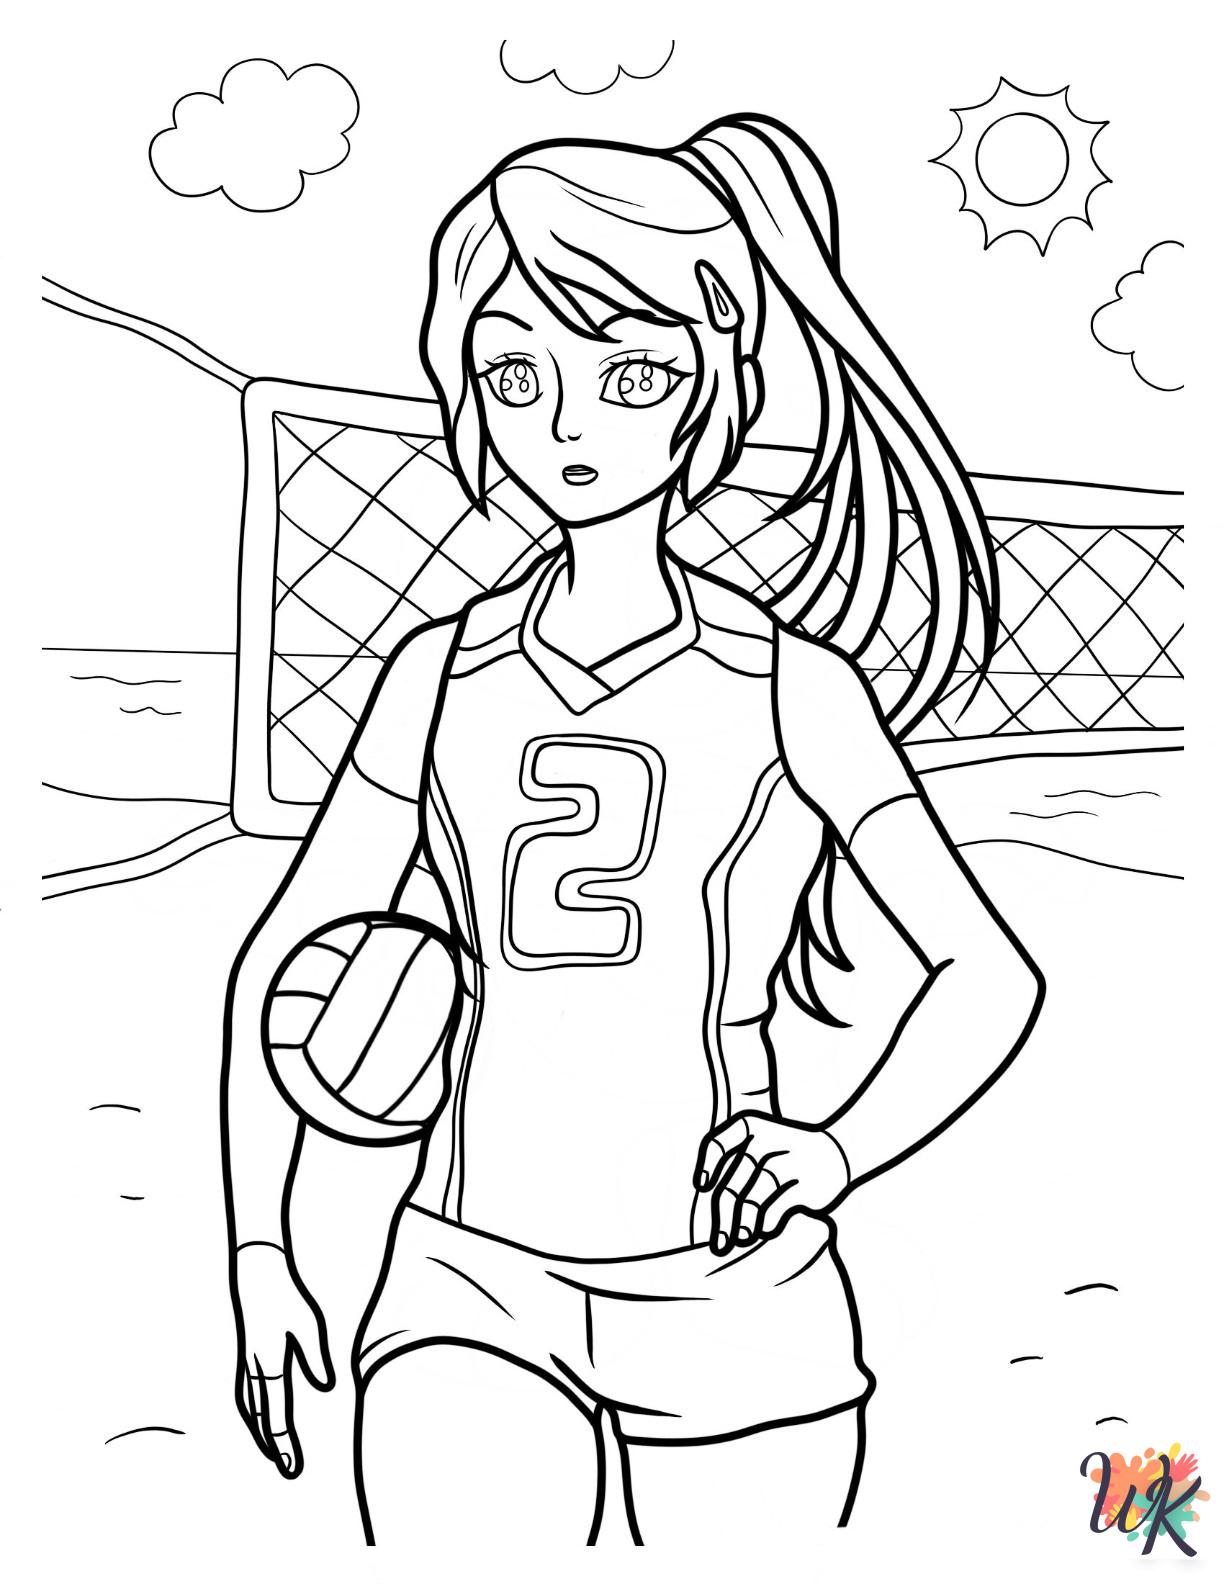 fun Volleyball coloring pages